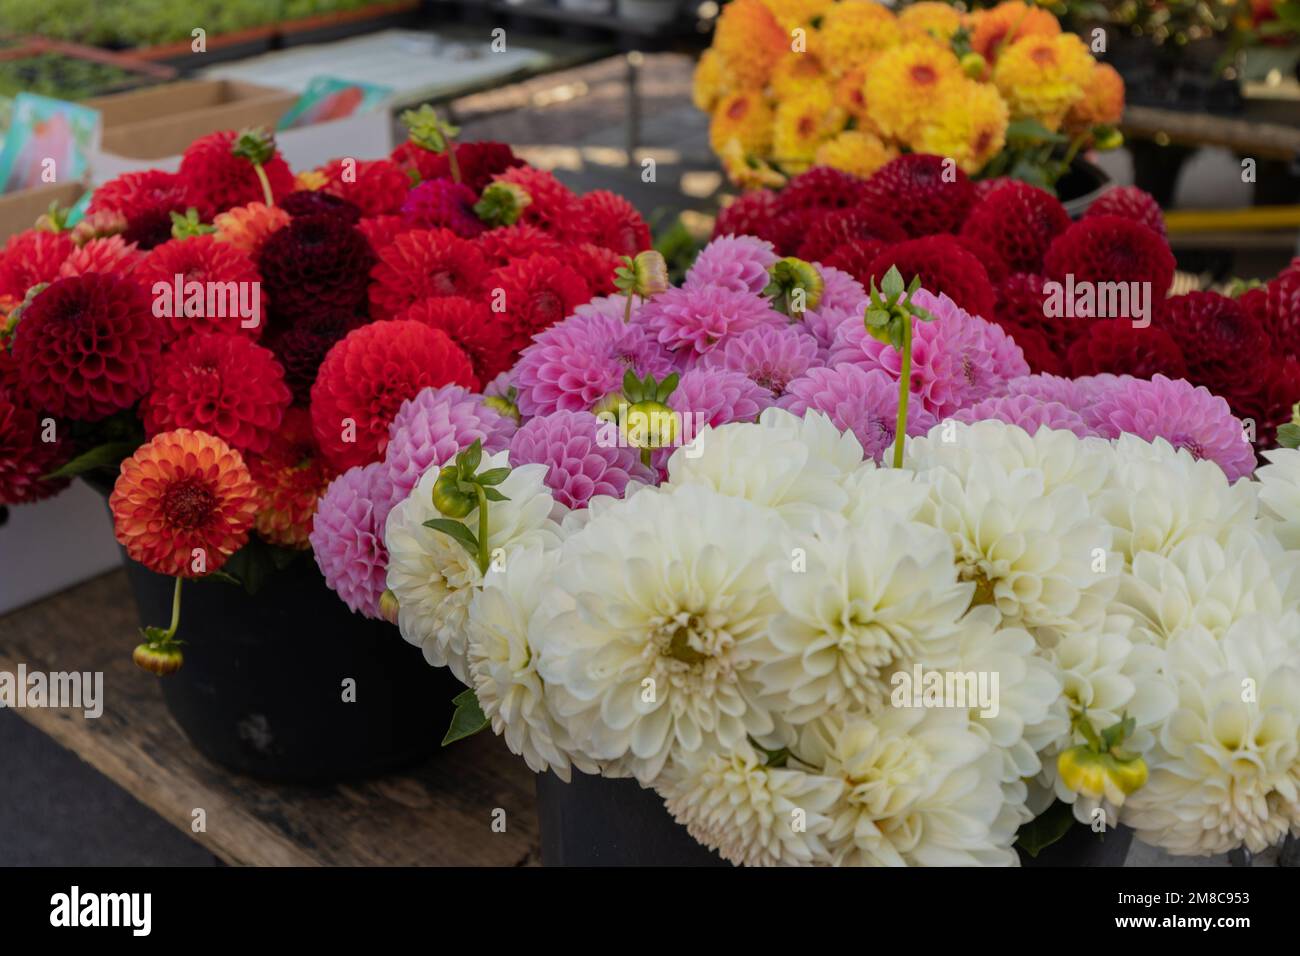 Bouquets of dahlias stand in buckets for sale on a street market, Austria, Mirabell Platz Stock Photo